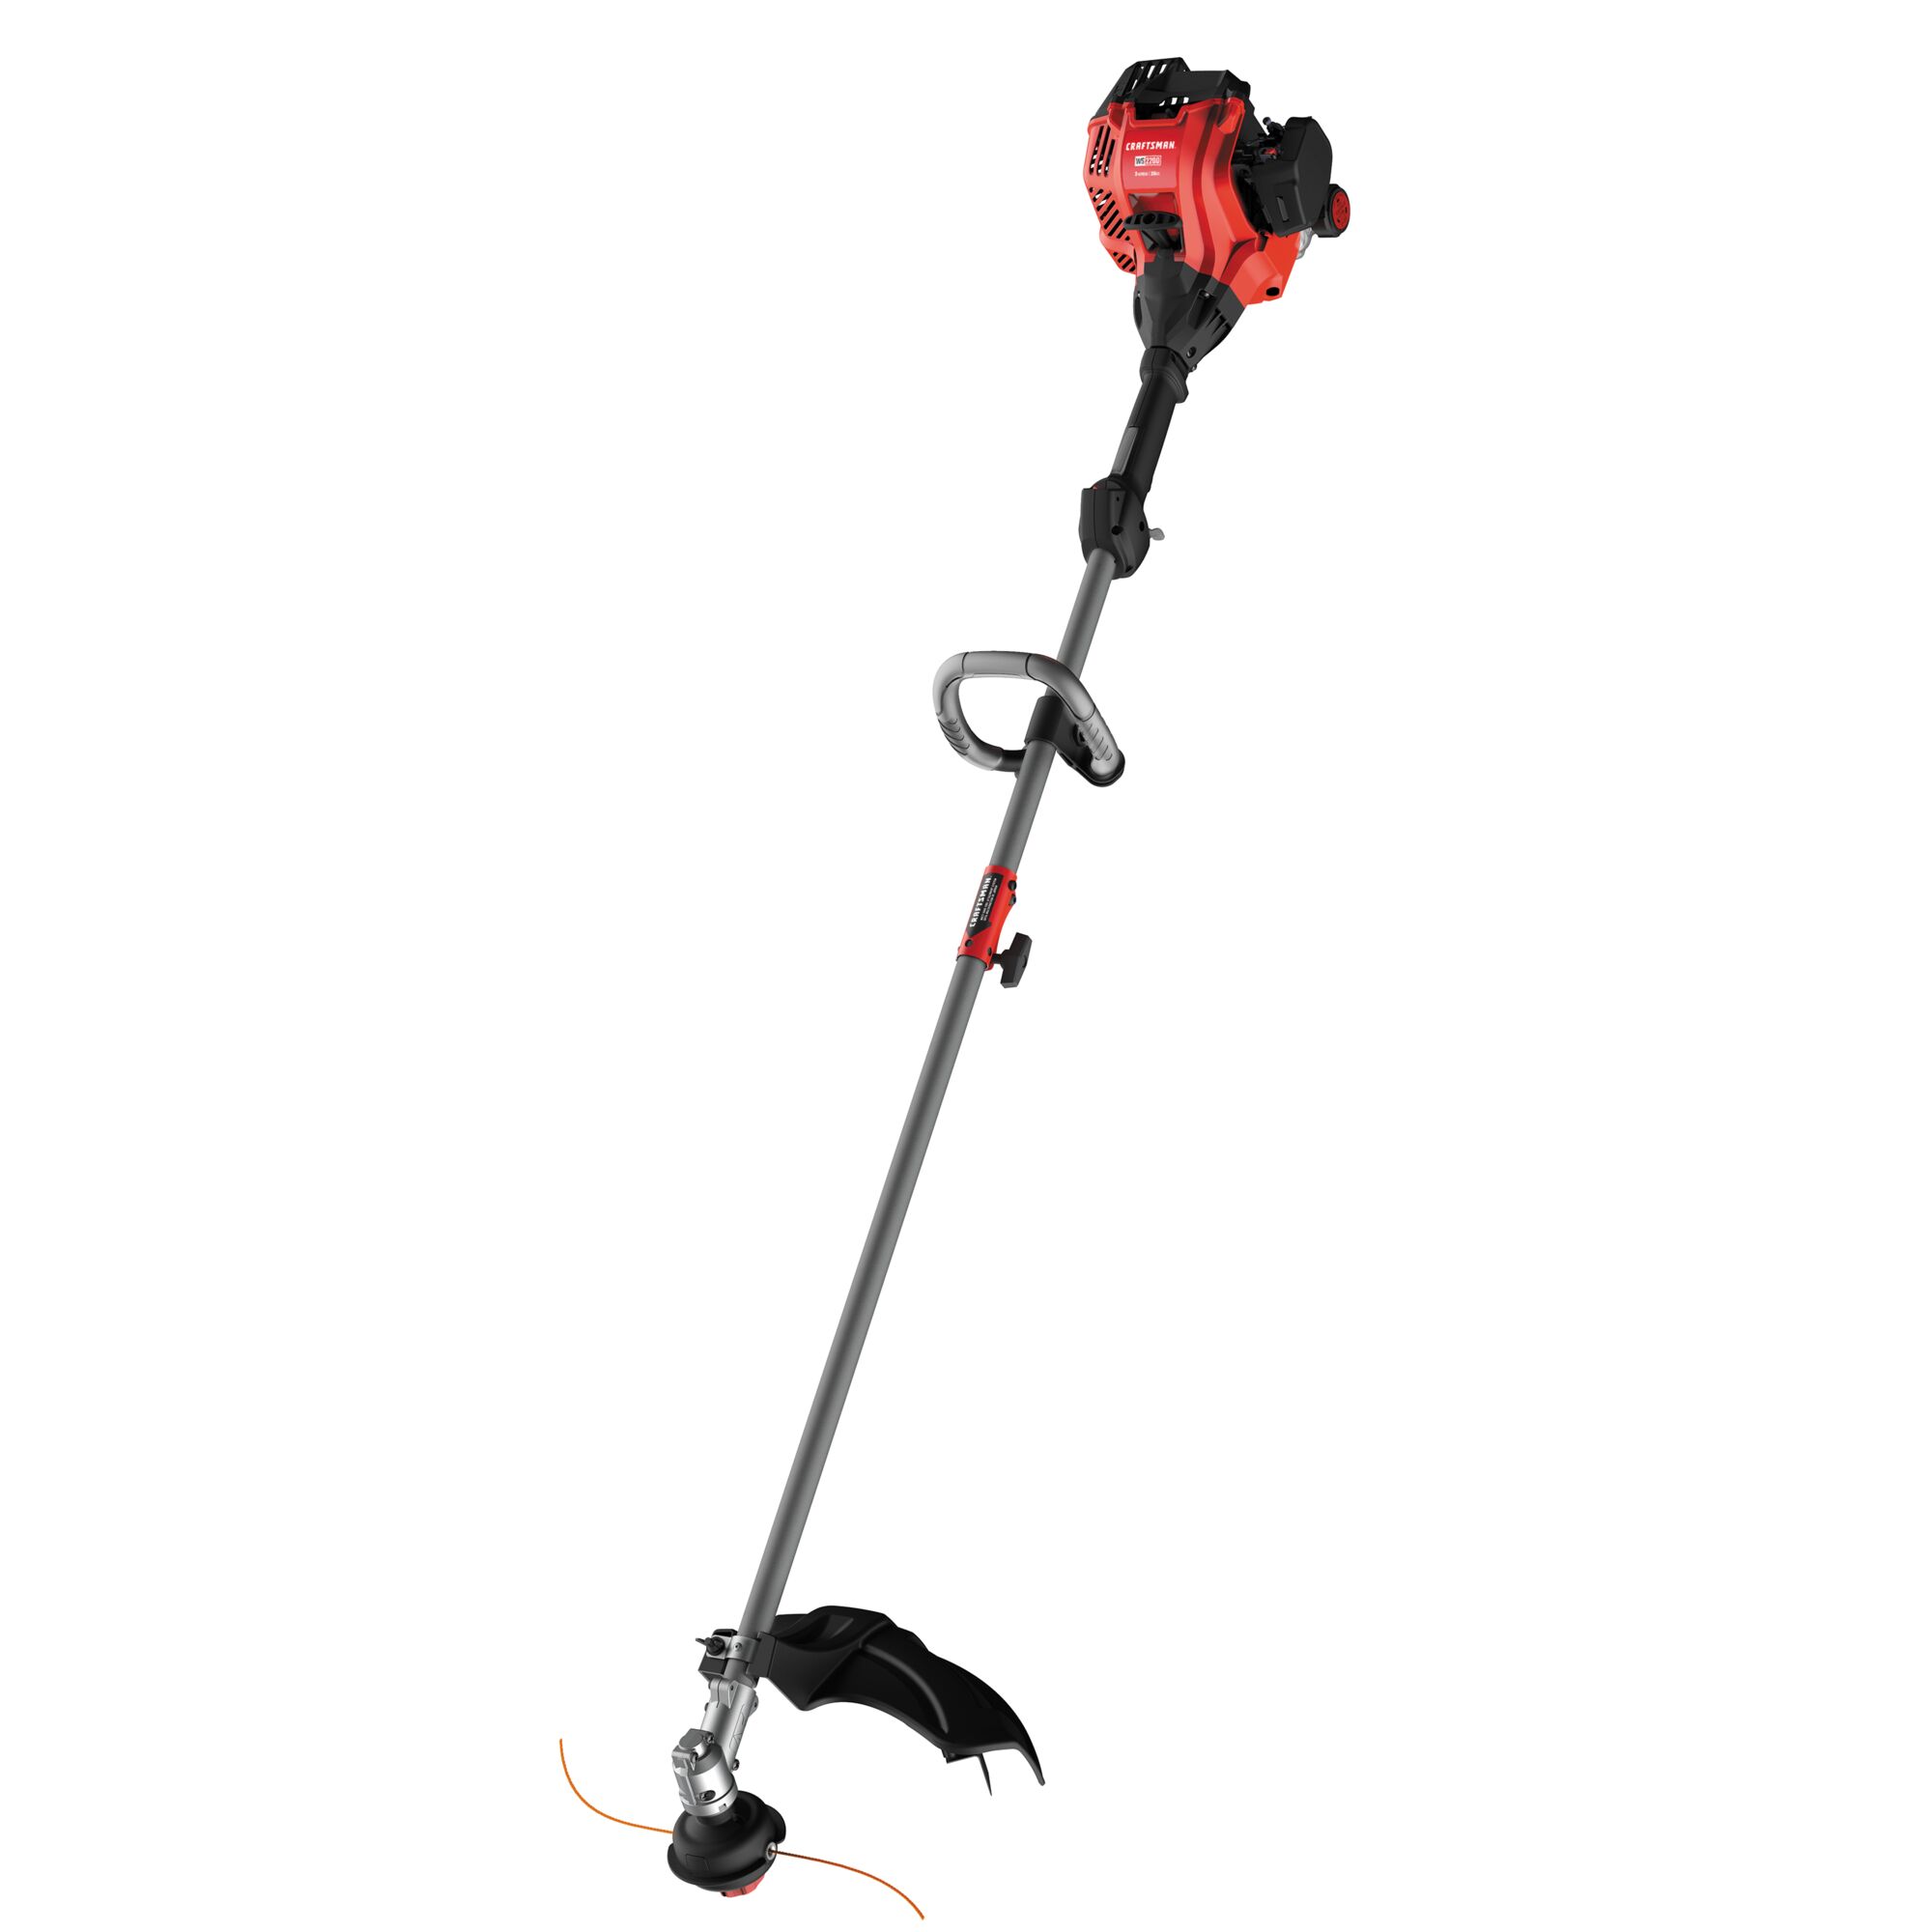 W S 2200 weedwacker 25 C C 2 cycle 17 inch attachment capable straight shaft gas trimmer.